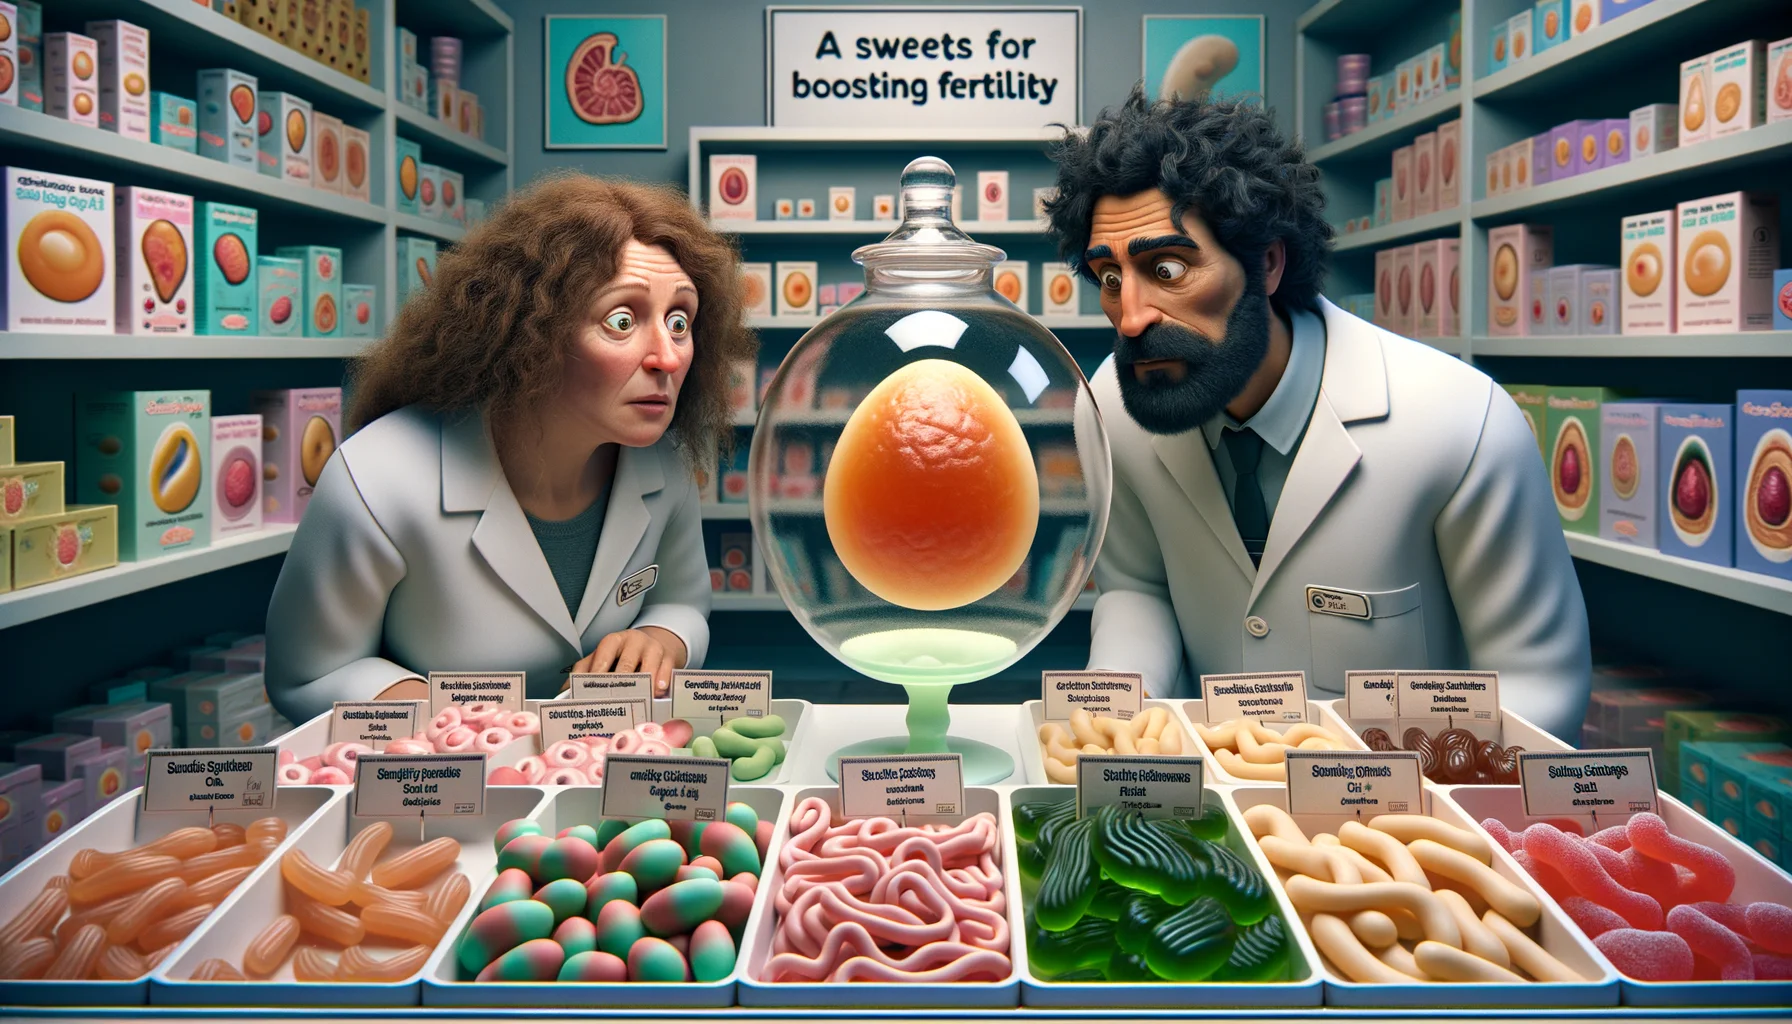 Imagine a lively, humorous scene in a scientifically advanced candy store. The shelves are full of uniquely shaped candies labeled as 'Sweets for Boosting Fertility'. Each piece of candy resembles a different human cell or structure related to fertility. In the midst of this quirky display, a couple of diverse backgrounds, a Caucasian woman with curly hair and a Middle-Eastern man with a well-trimmed beard, are curiously examining a giant gummy egg cell, having mixed reactions. The overall atmosphere is light-hearted, creating a juxtaposition with the serious theme.